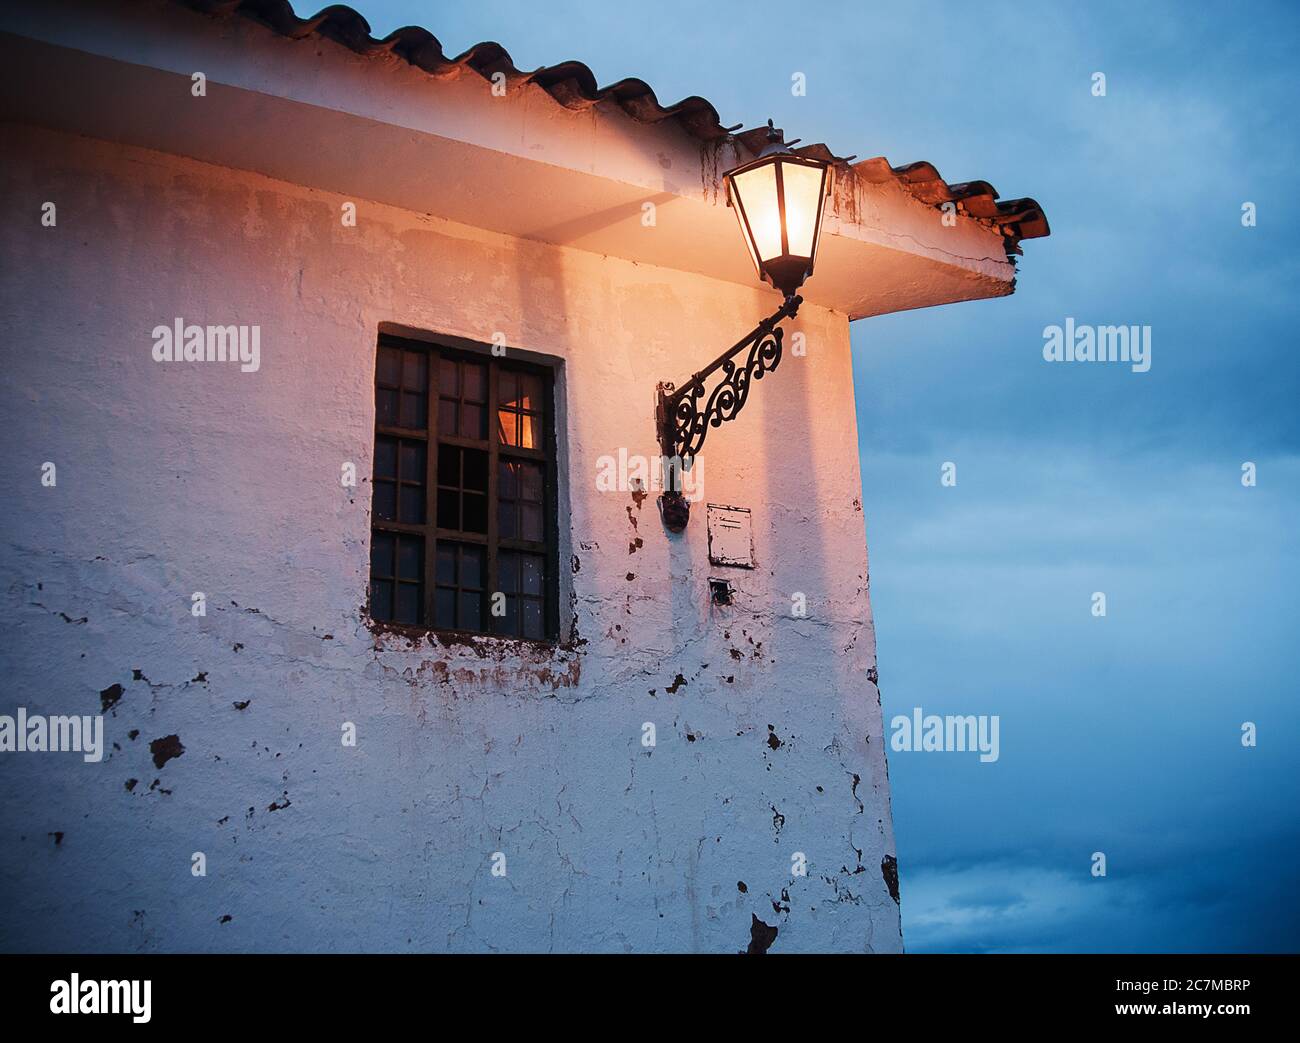 Old lampost on a building in Chinchero Peru, South America Stock Photo